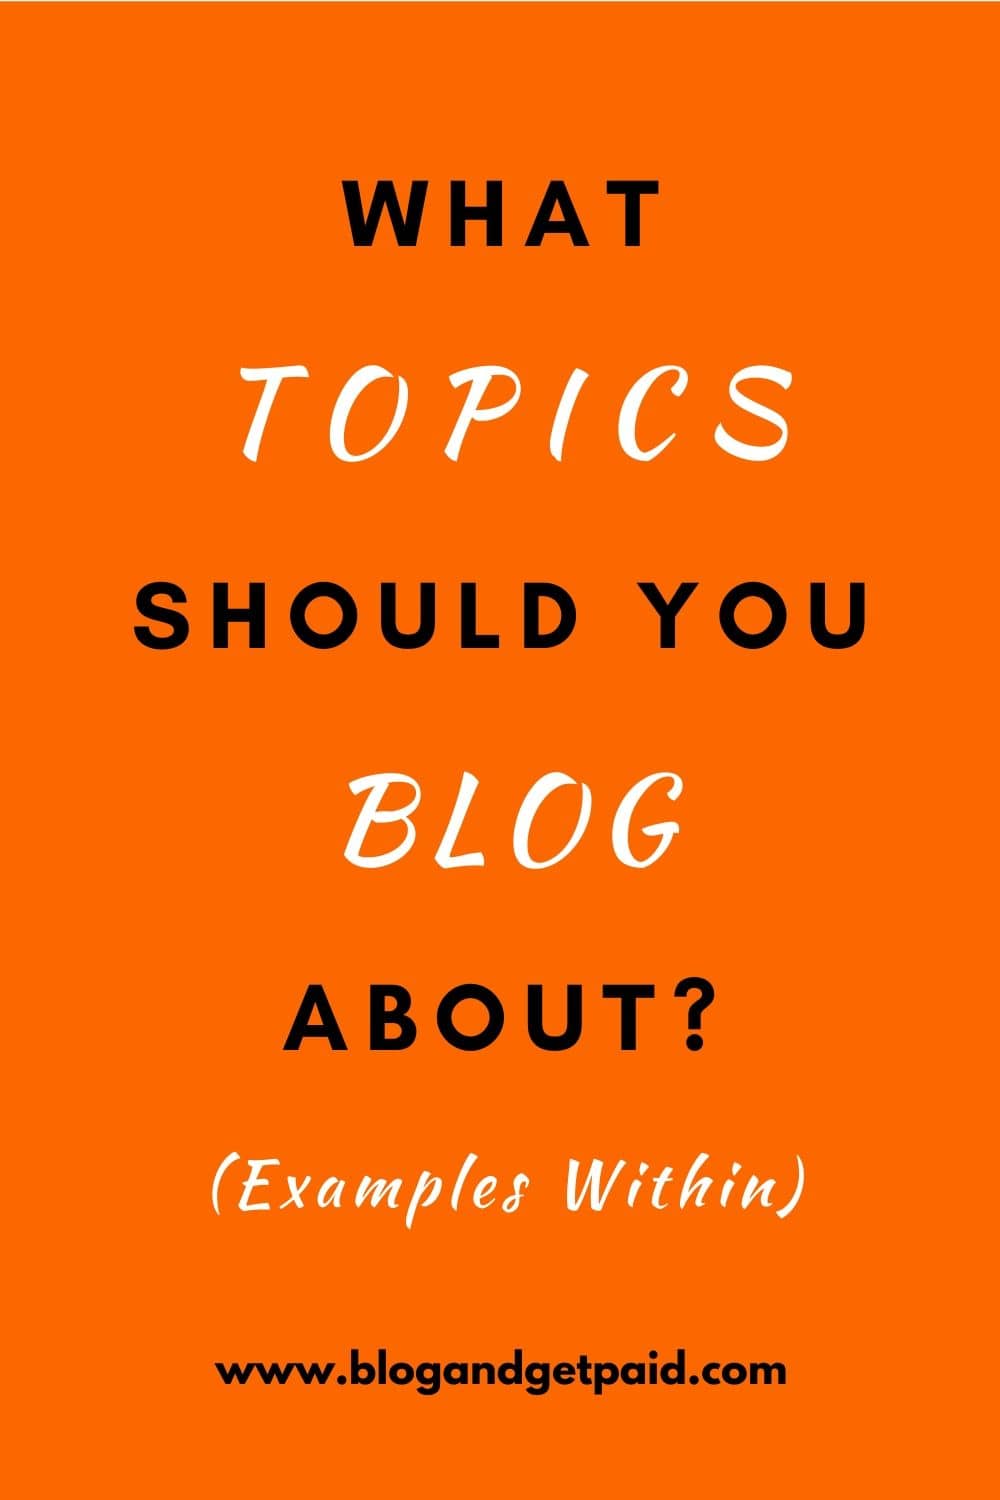 Blogging FAQs: What Are Some Topics To Blog About?